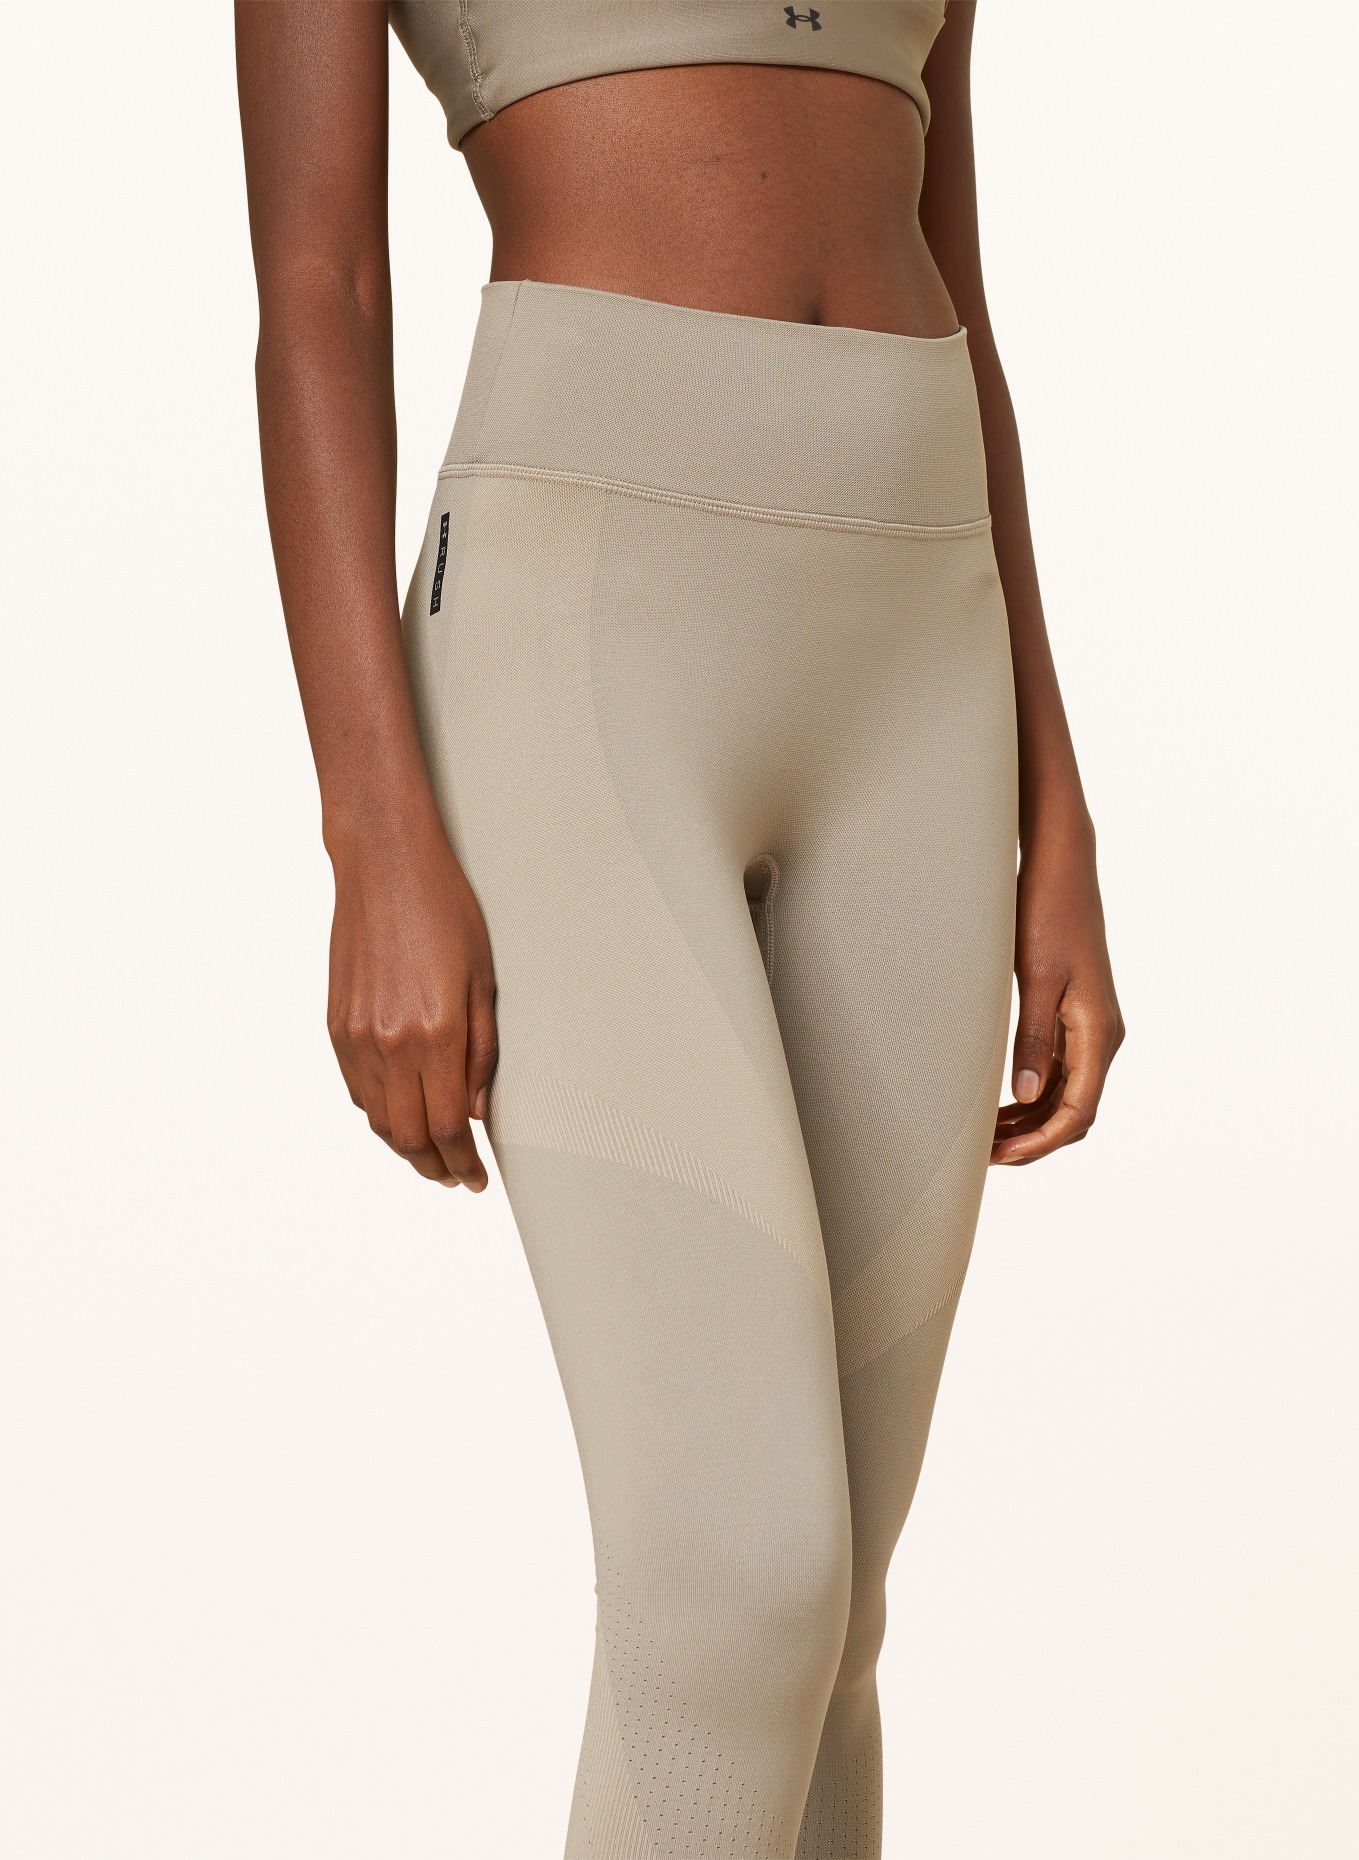 UNDER ARMOUR Tights RUSH, Farbe: TAUPE (Bild 5)